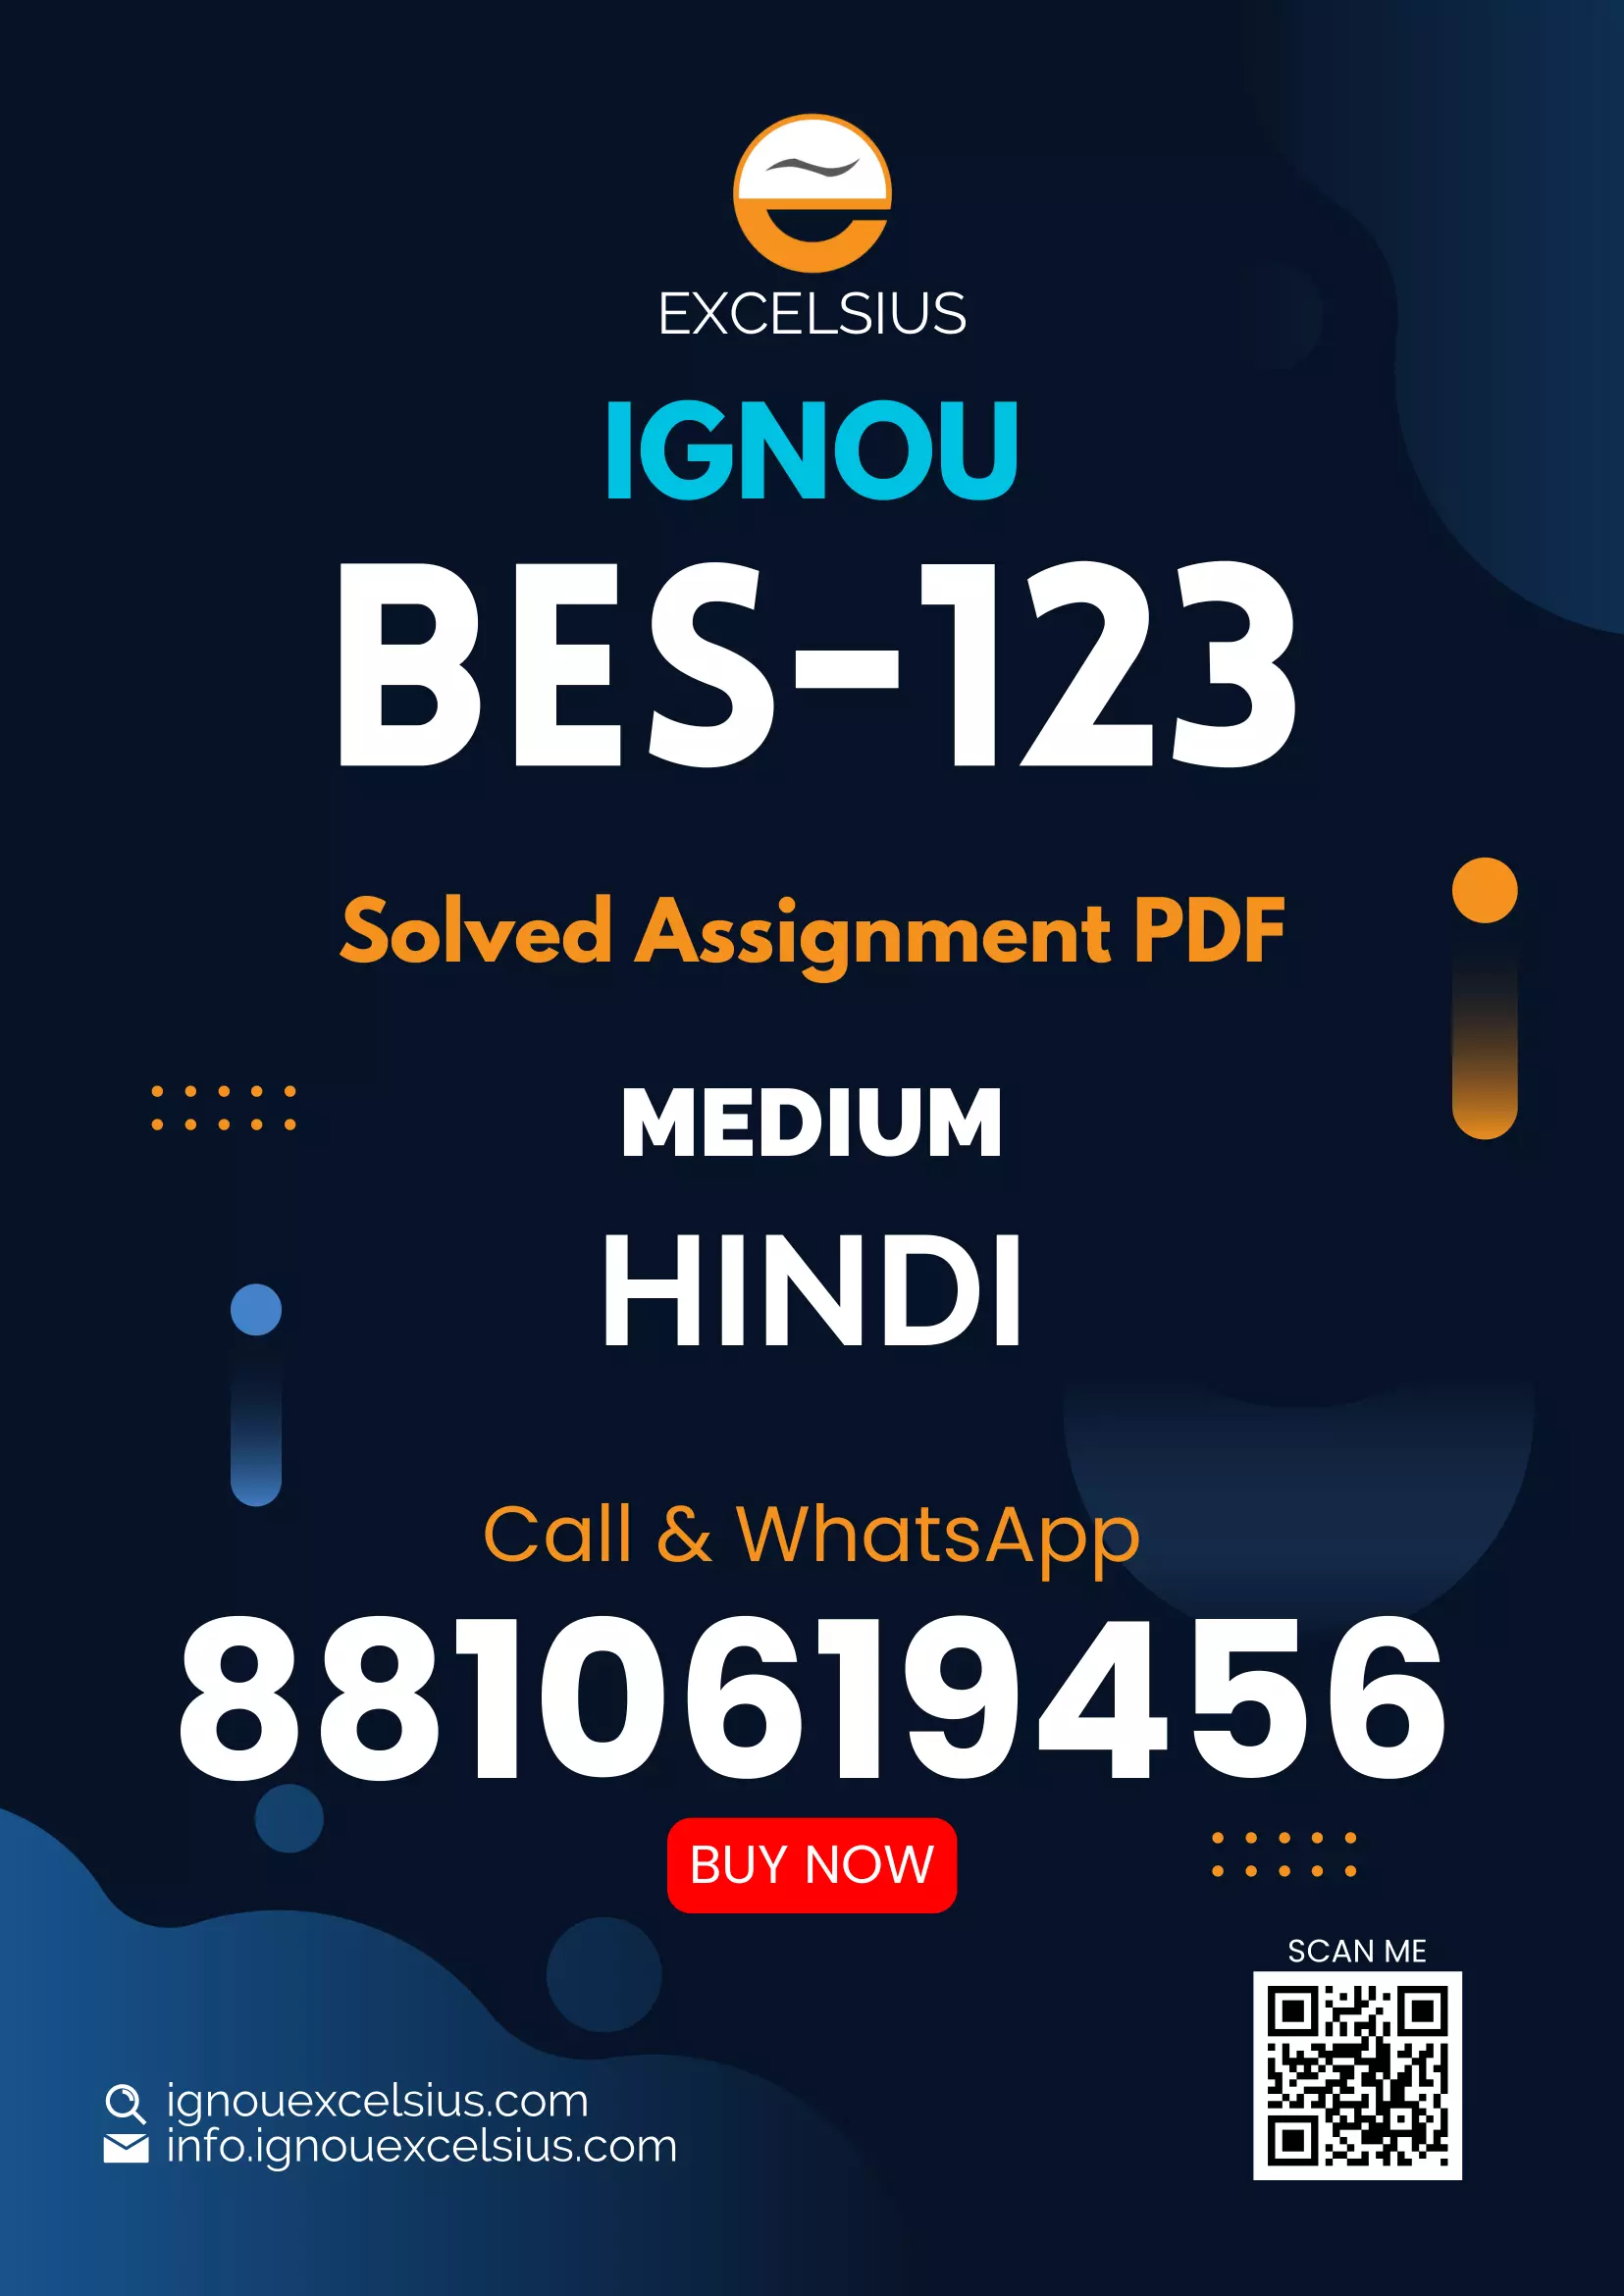 IGNOU BES-123 - Learning and Teaching, Latest Solved Assignment-January 2022